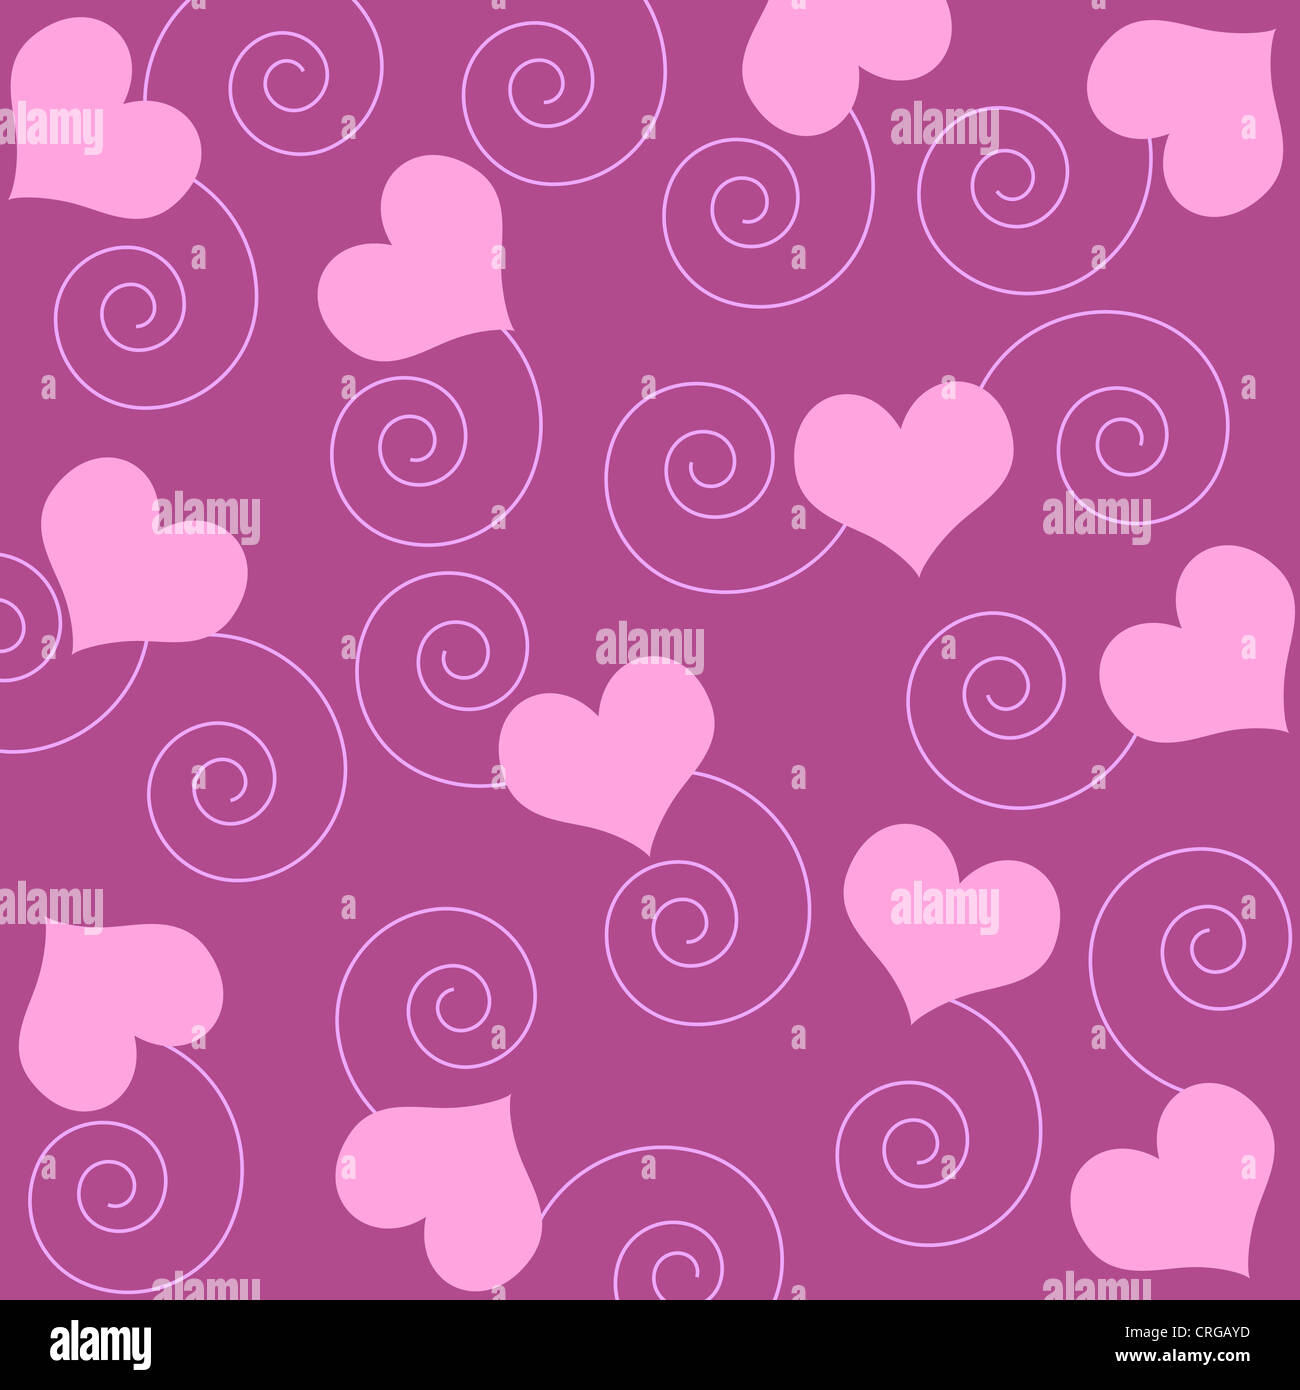 Seamless hearts and spiral pattern Stock Photo